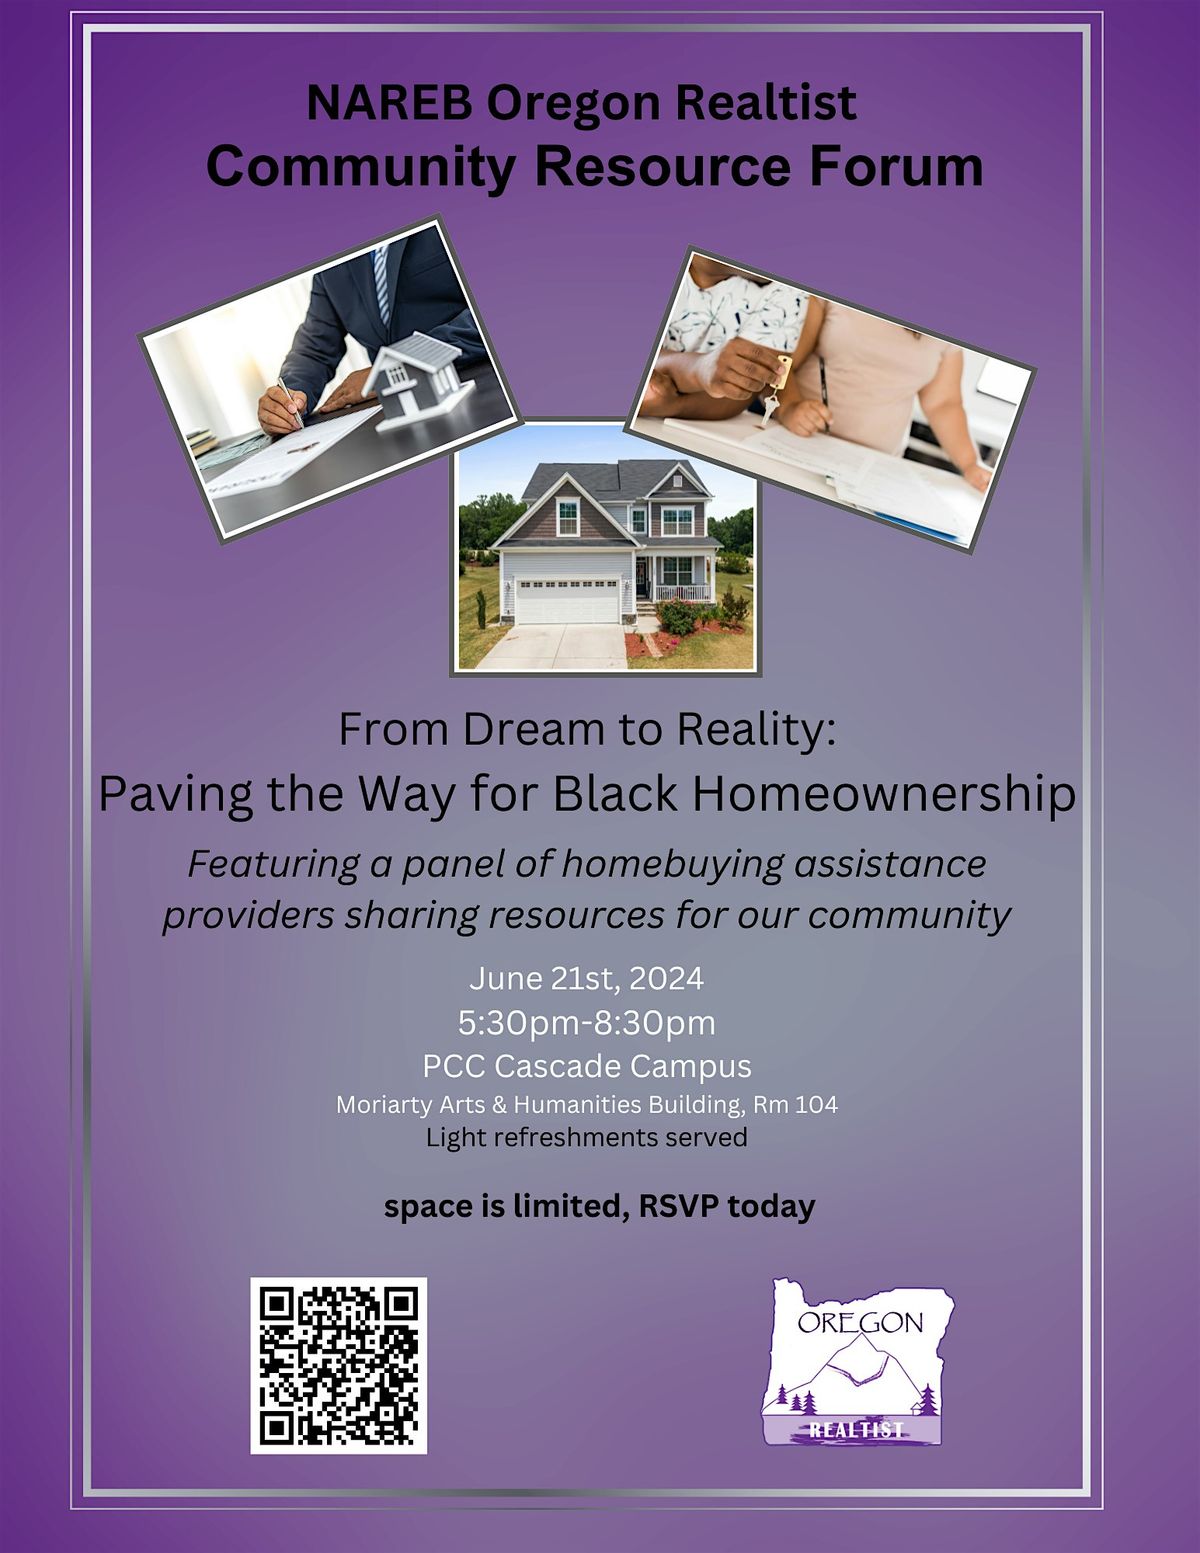 From Dream to Reality: Paving the Way to Black Homeownership